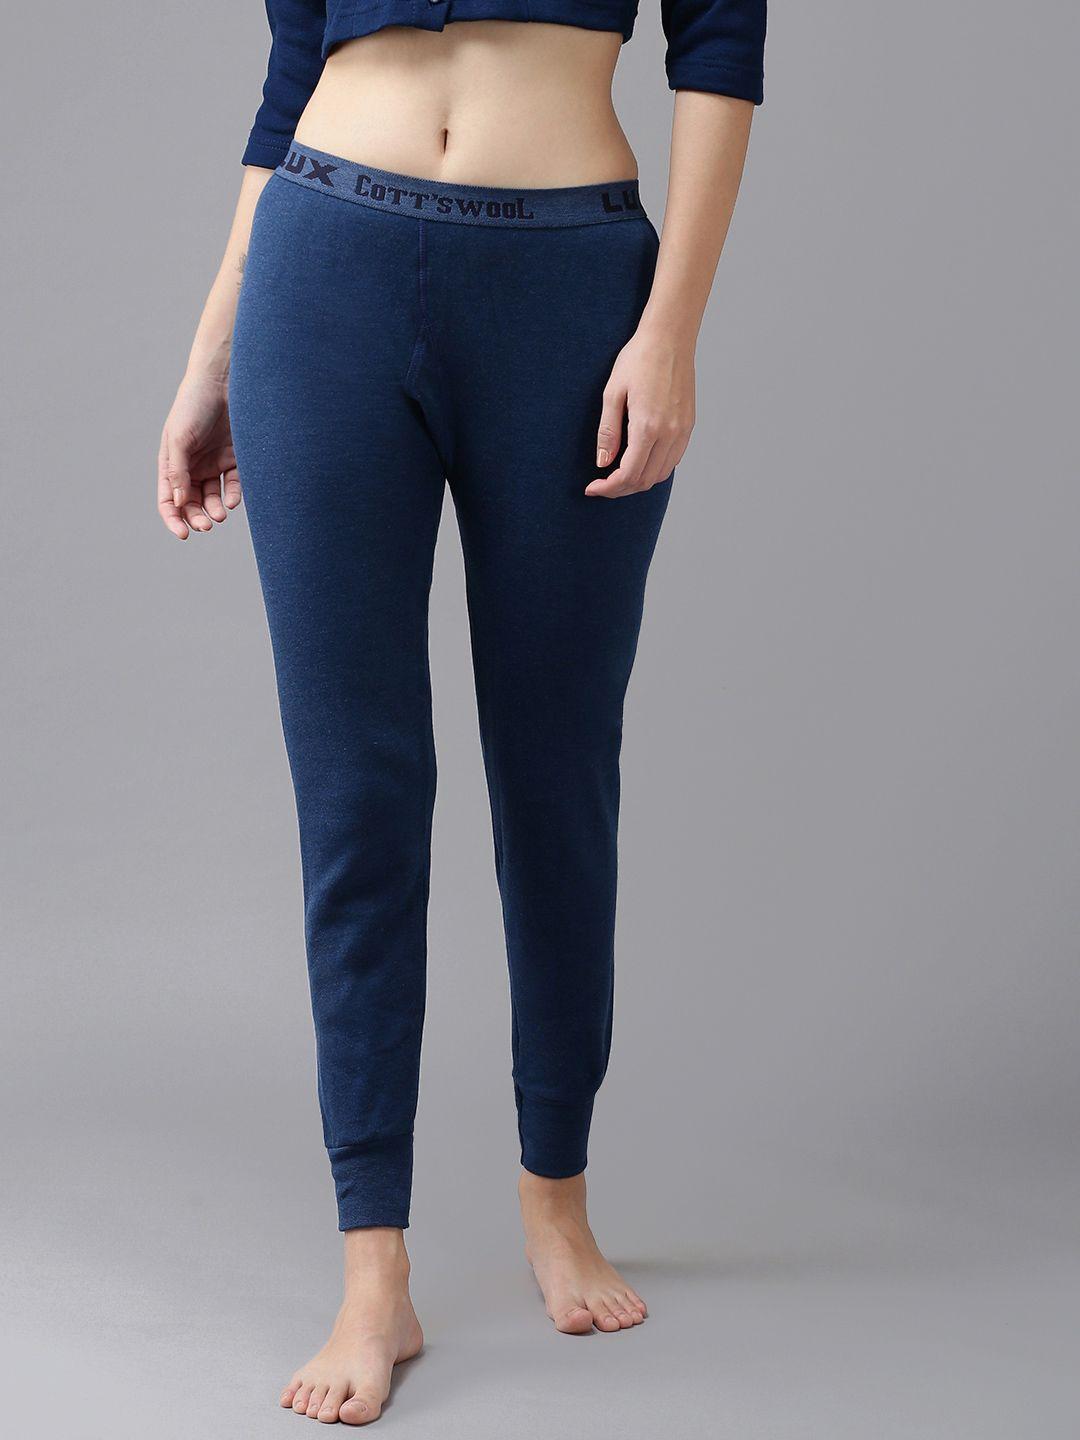 lux cottswool women blue solid cotton thermal bottoms